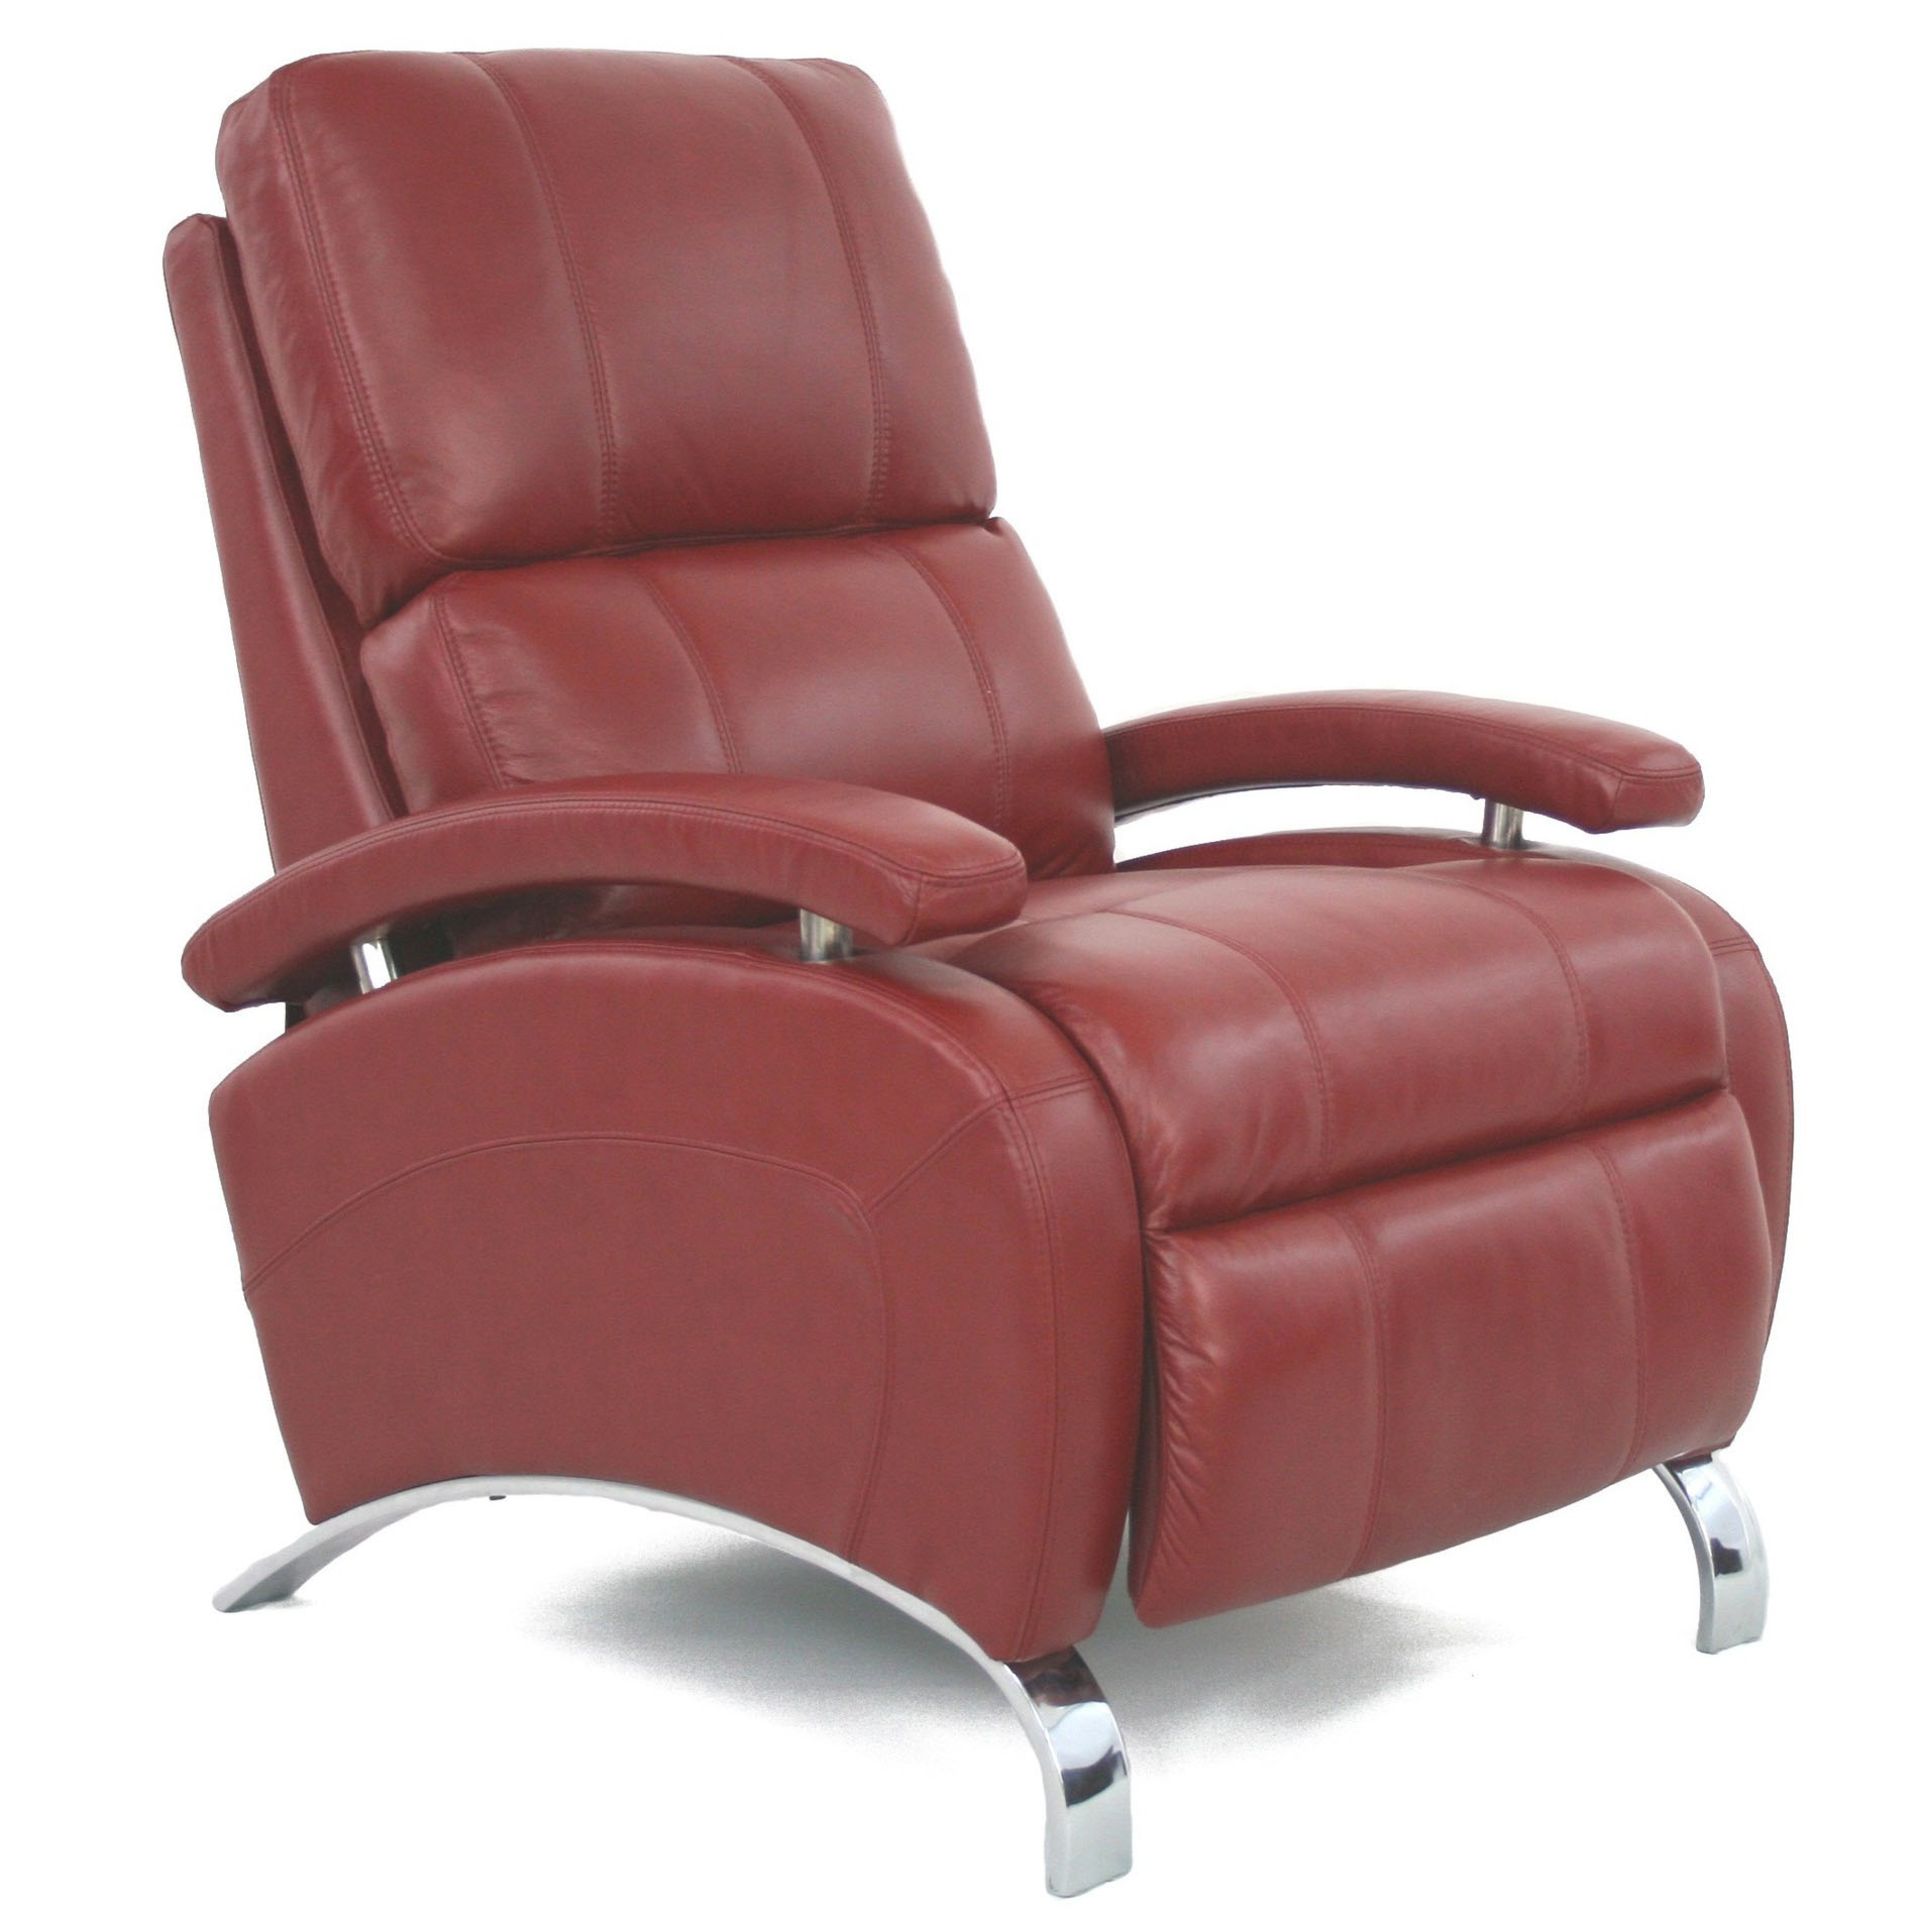 1 BARCALOUNGER PEGASUS RED LEATHER RECLINER CHAIR RRP Â£399 (GENERIC IMAGE GUIDE)